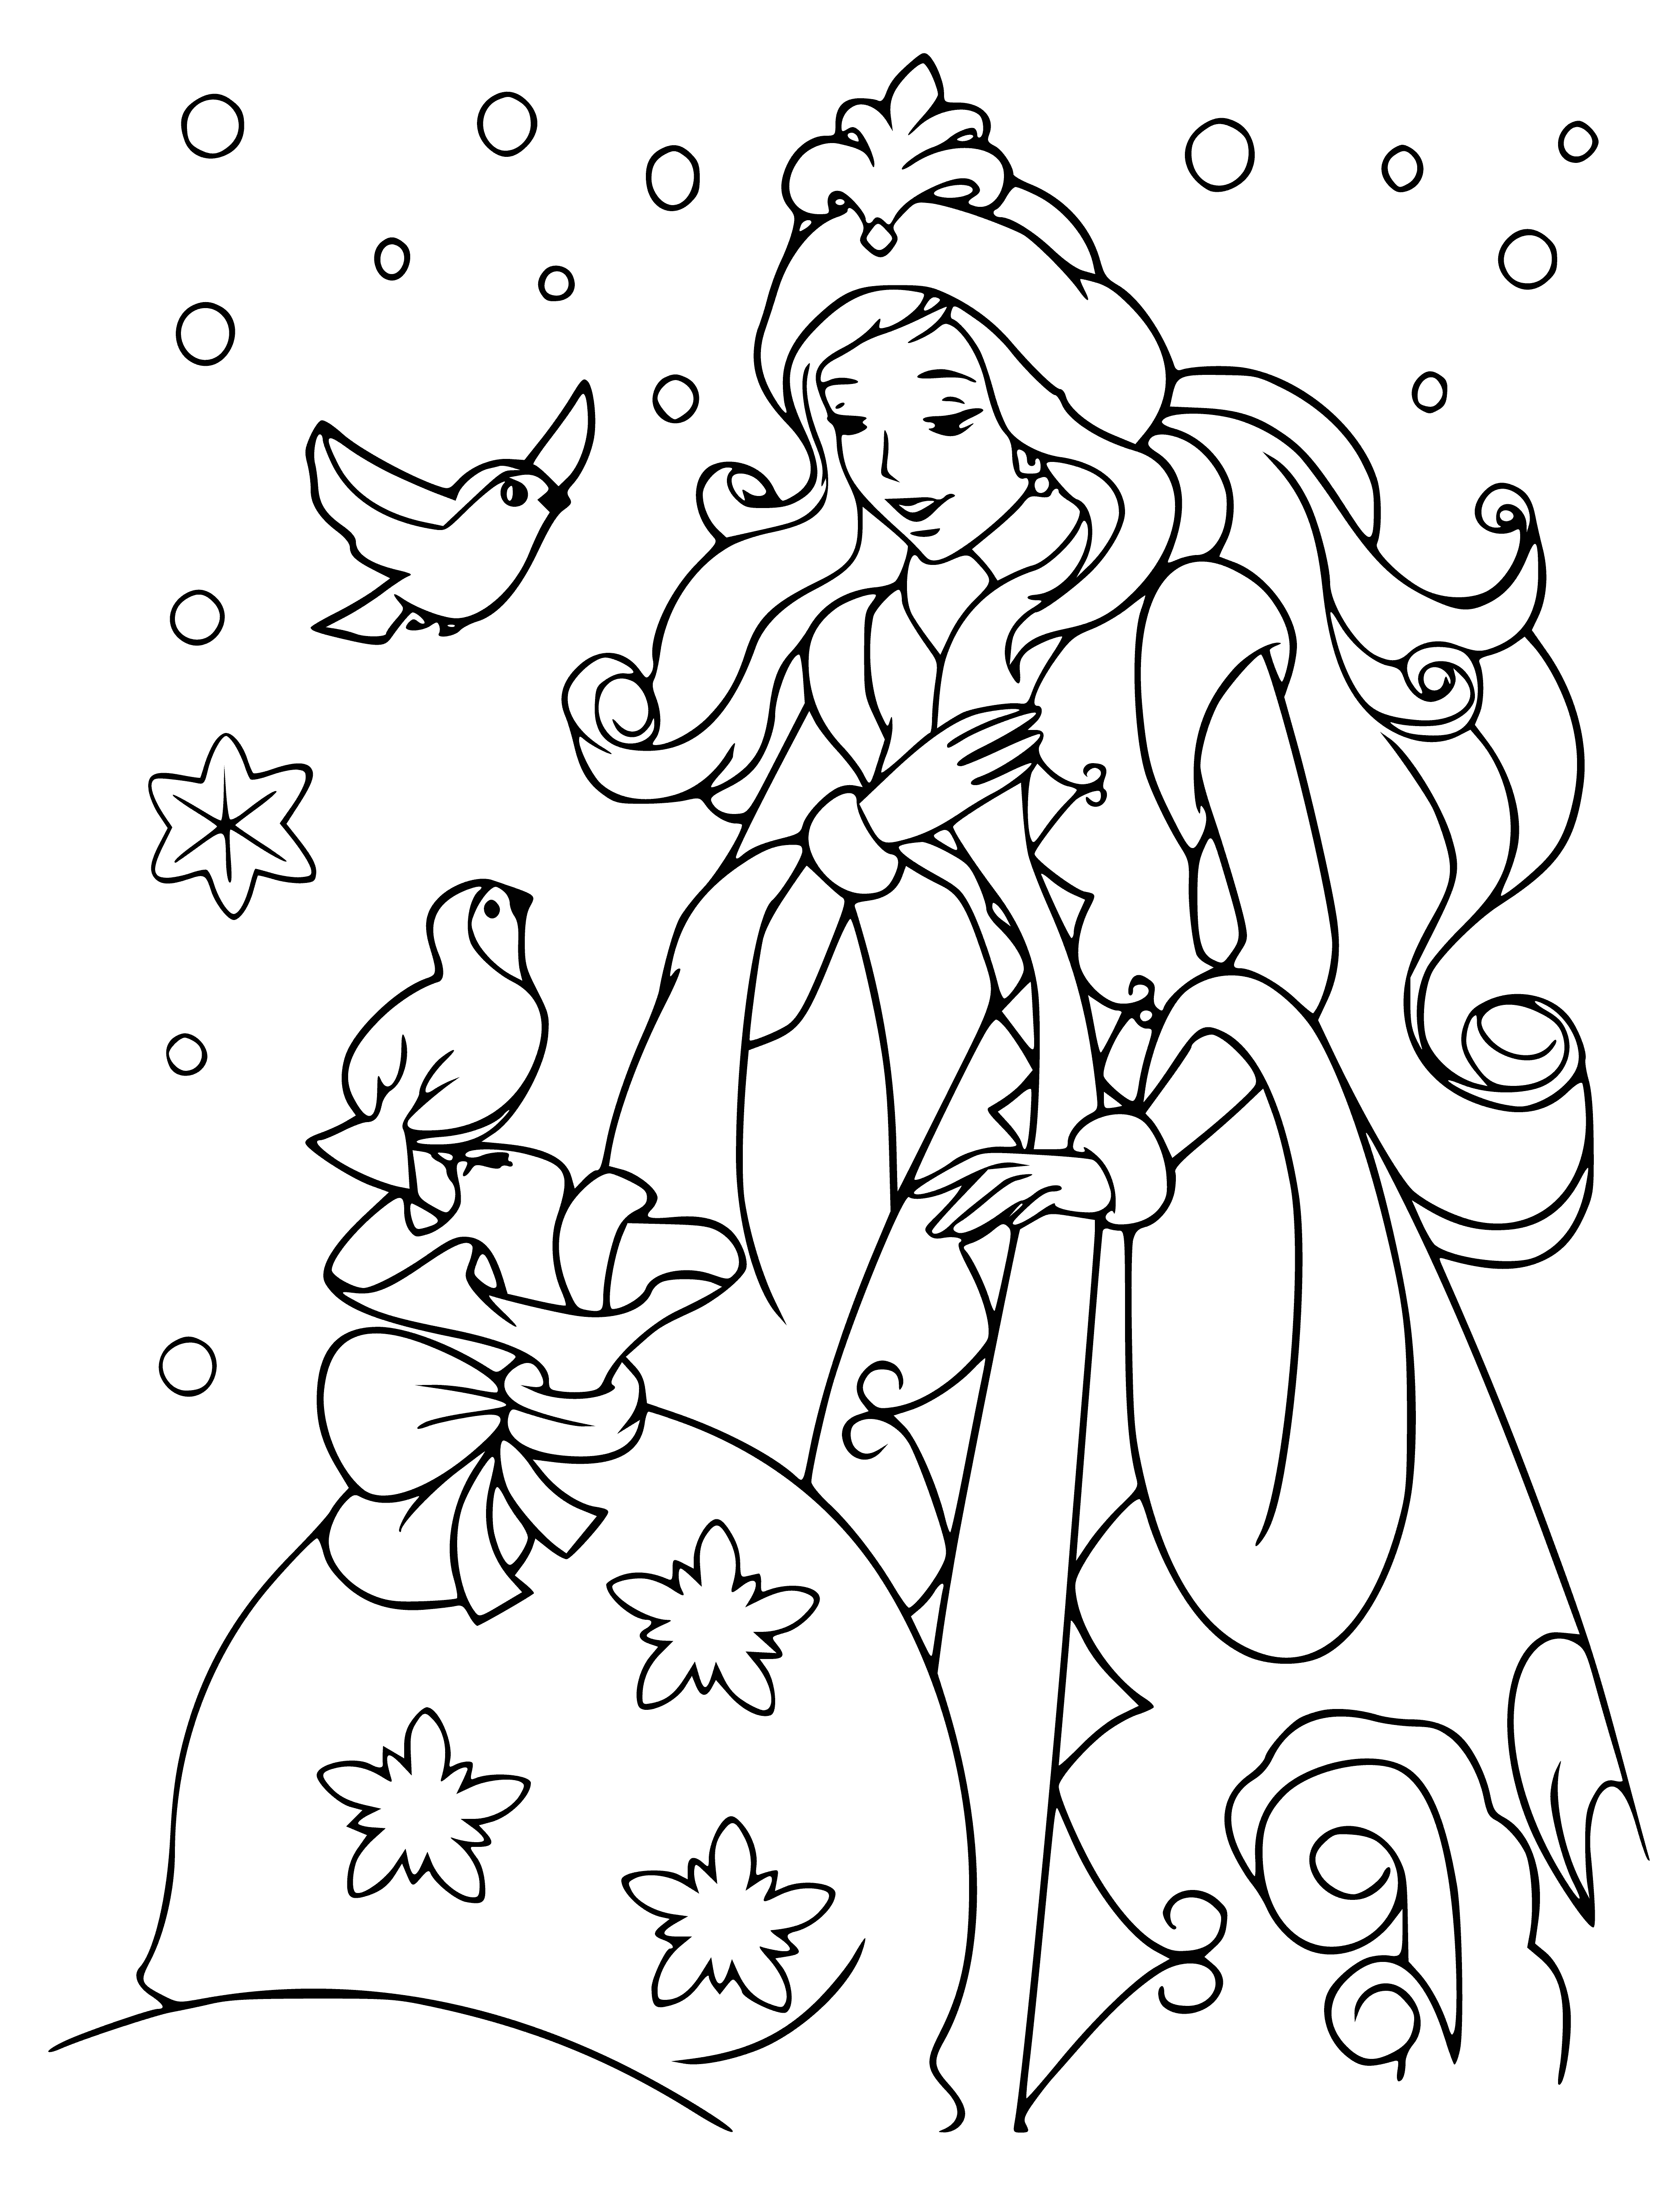 coloring page: Girl in white dress and fur-trimmed cape holds string of lights and gifts in the snow.